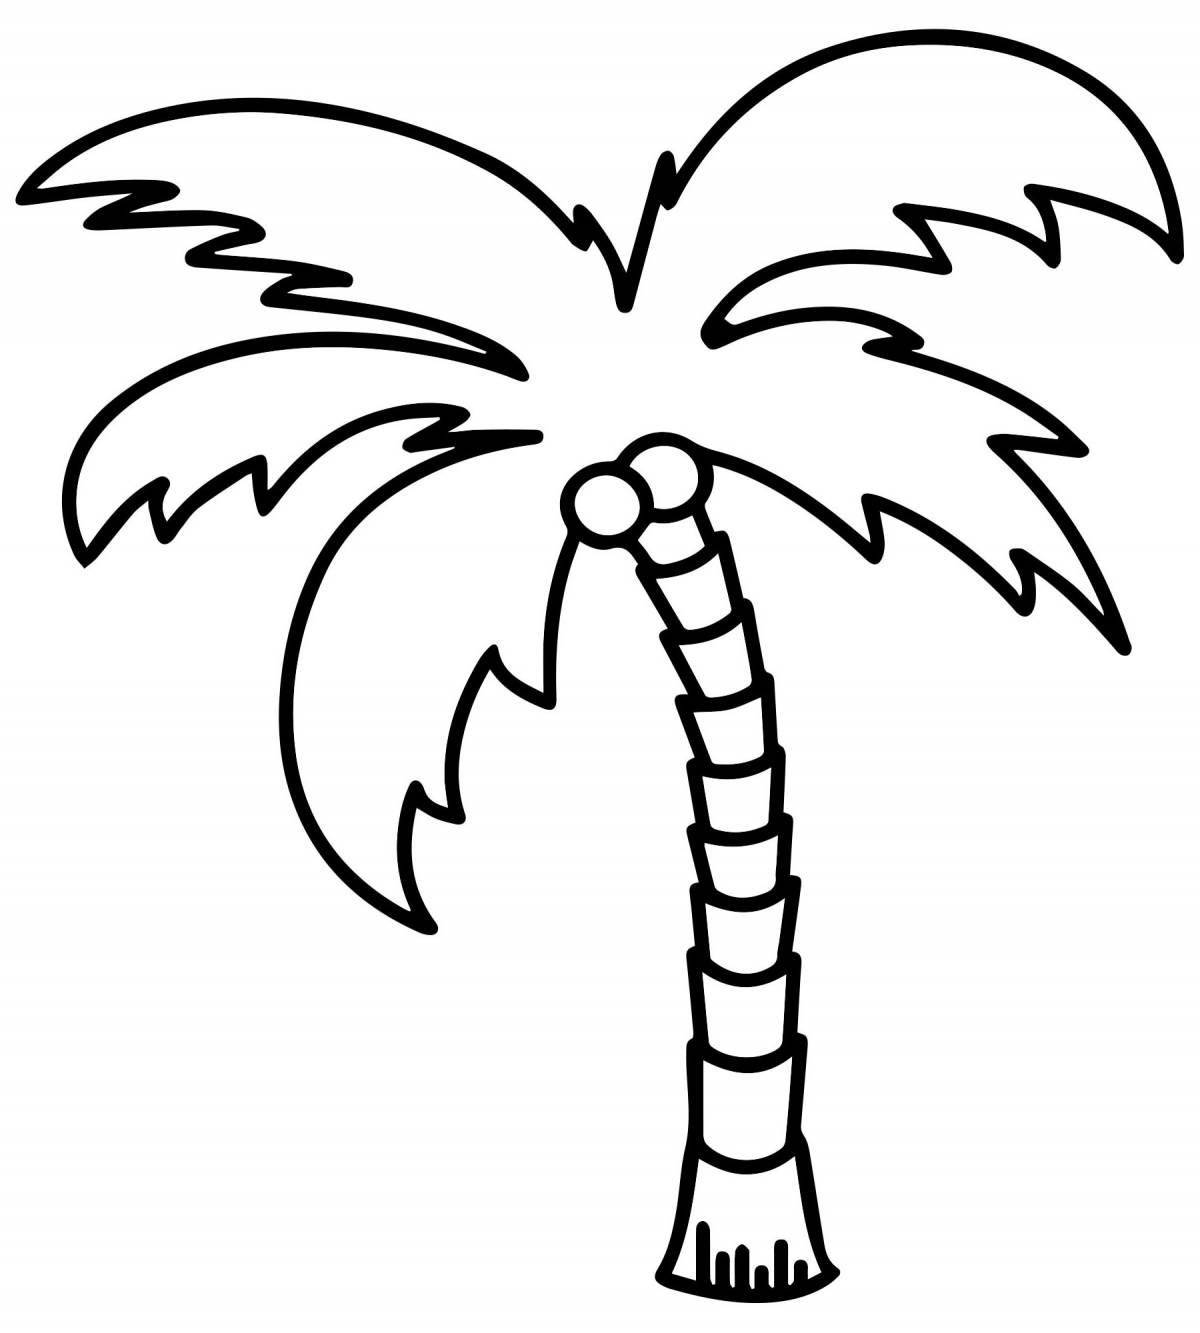 Bright palm tree coloring book for kids